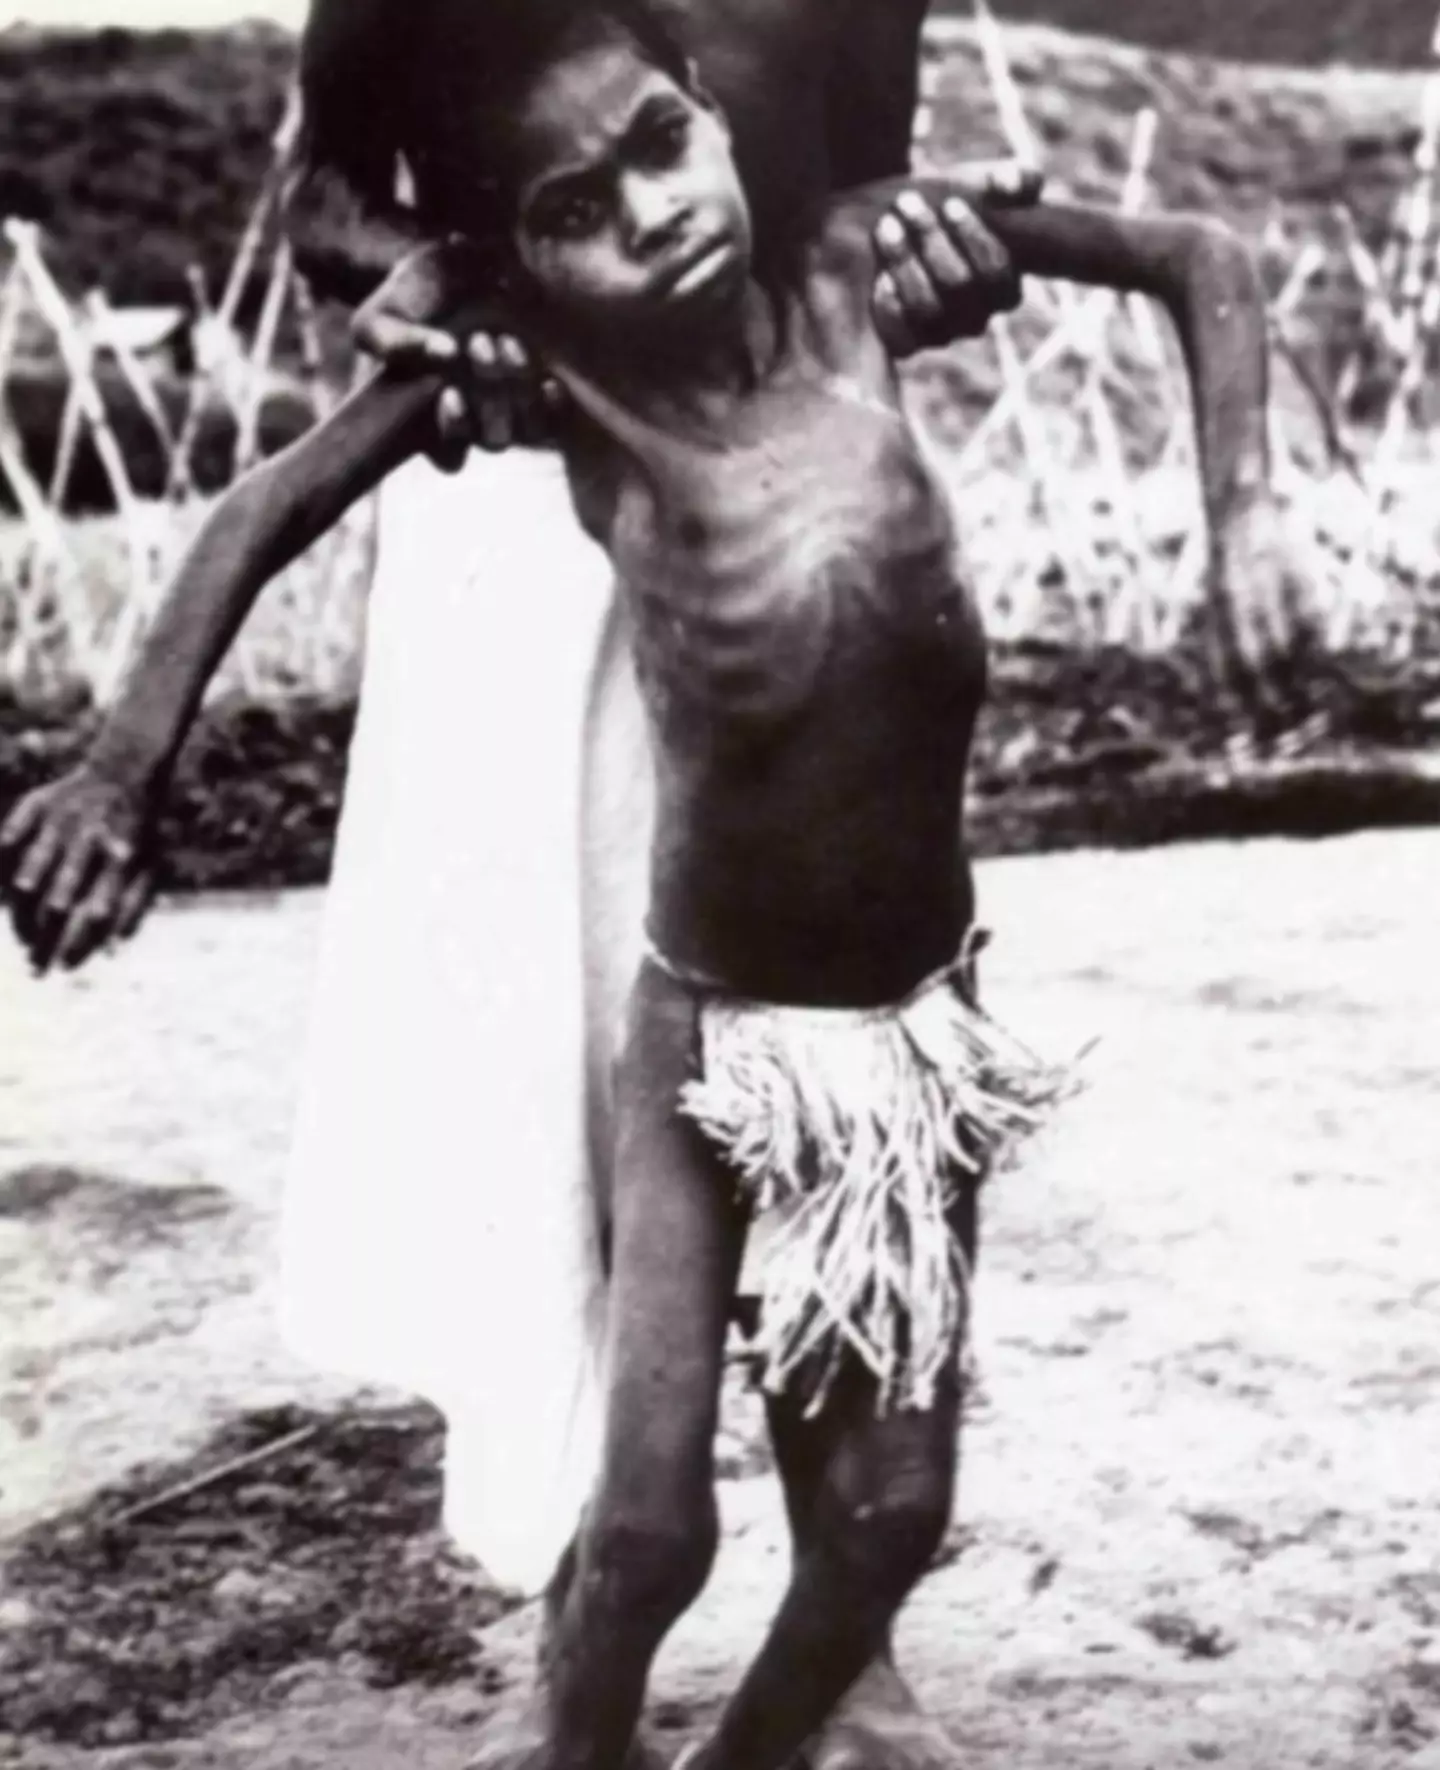 A young child impacted by kuru.